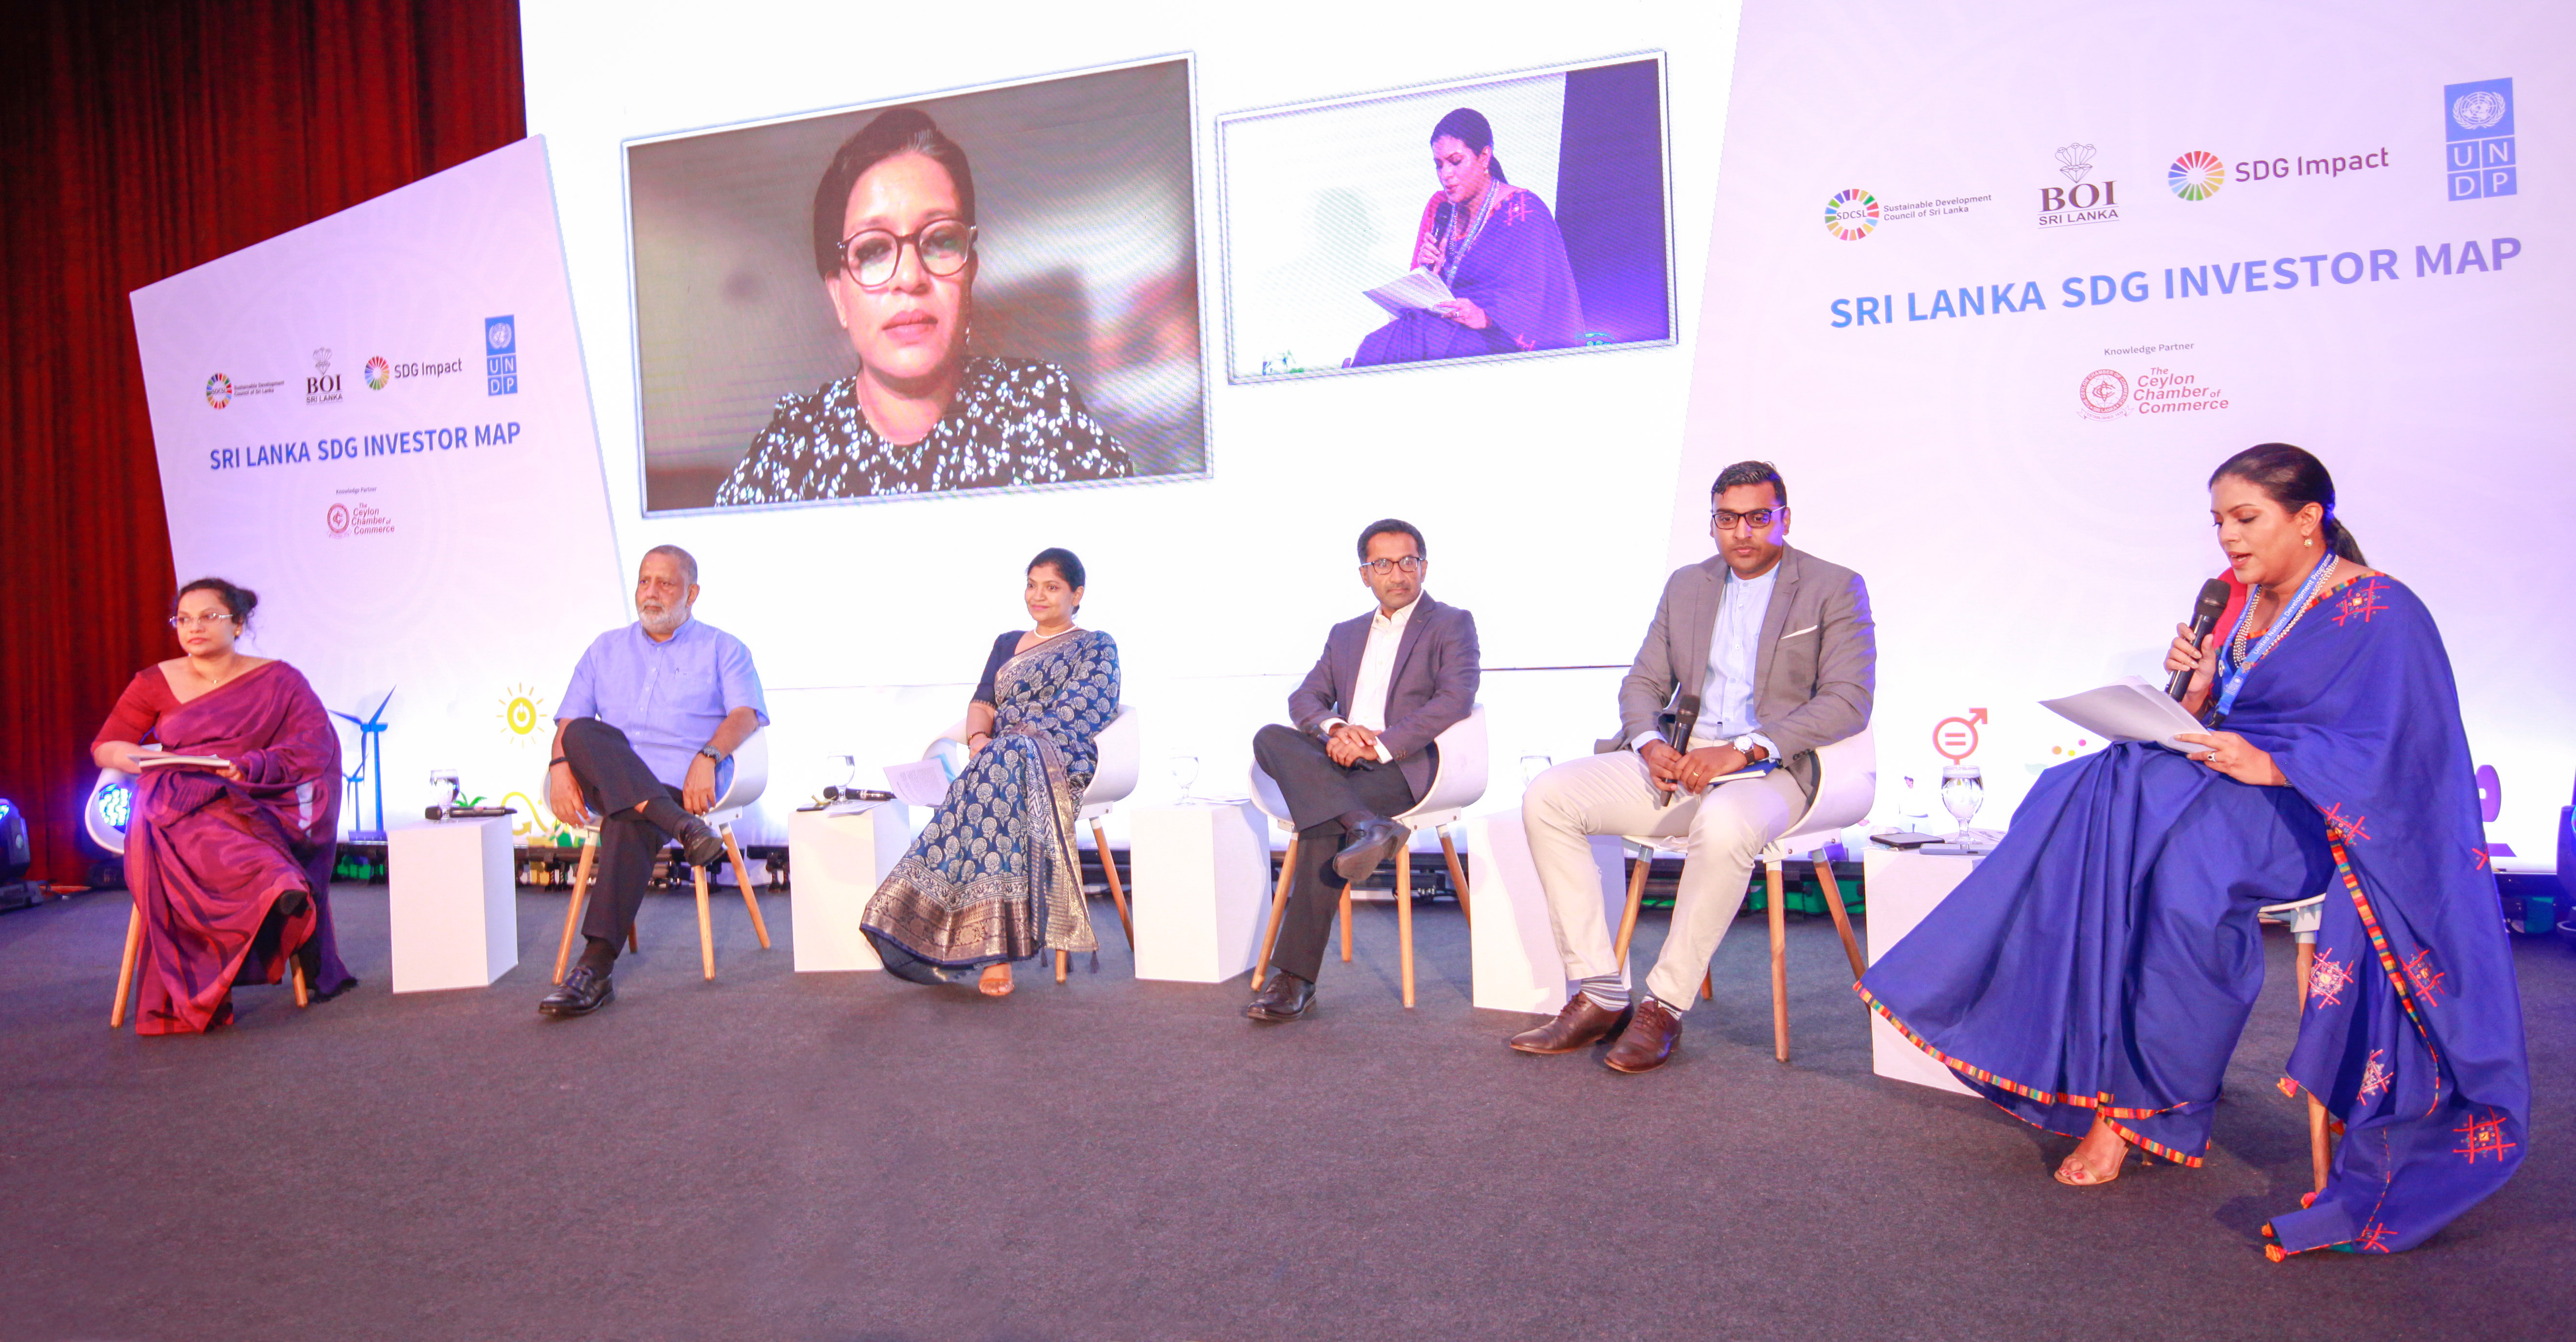 Panel discussion at the launch event 